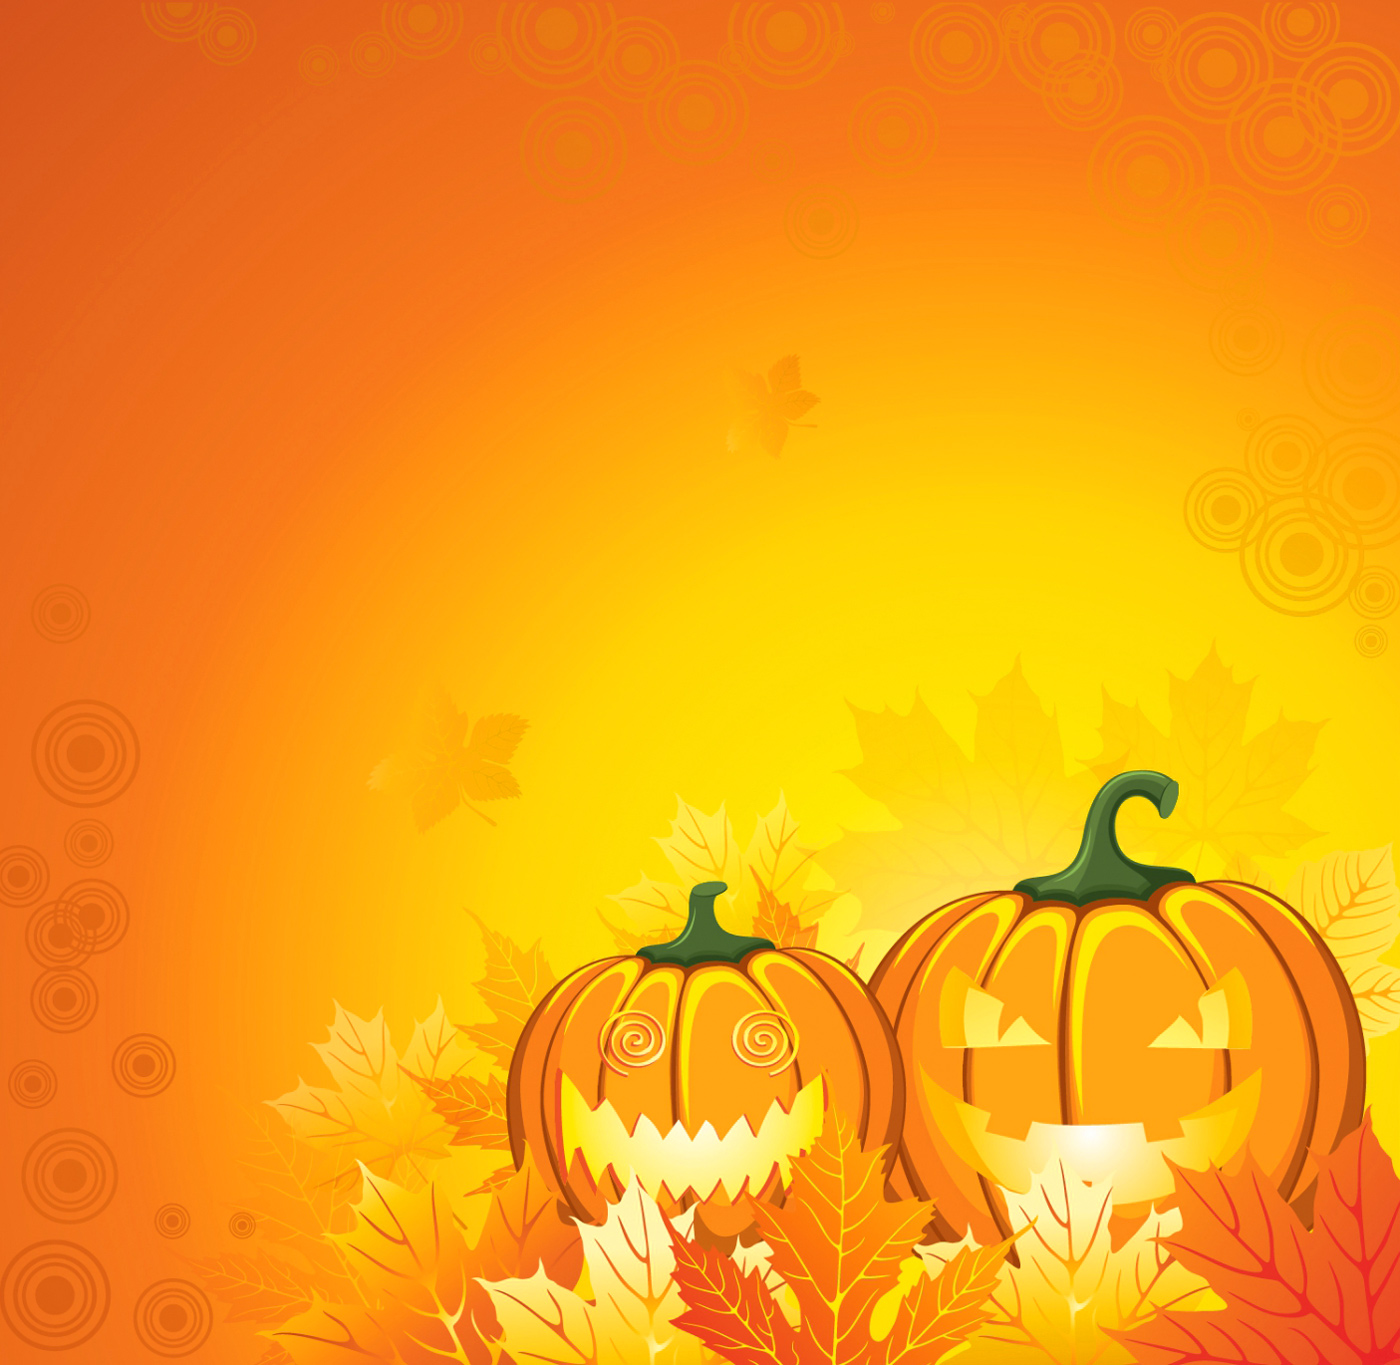 Halloween orange background - spooky wallpapers and images